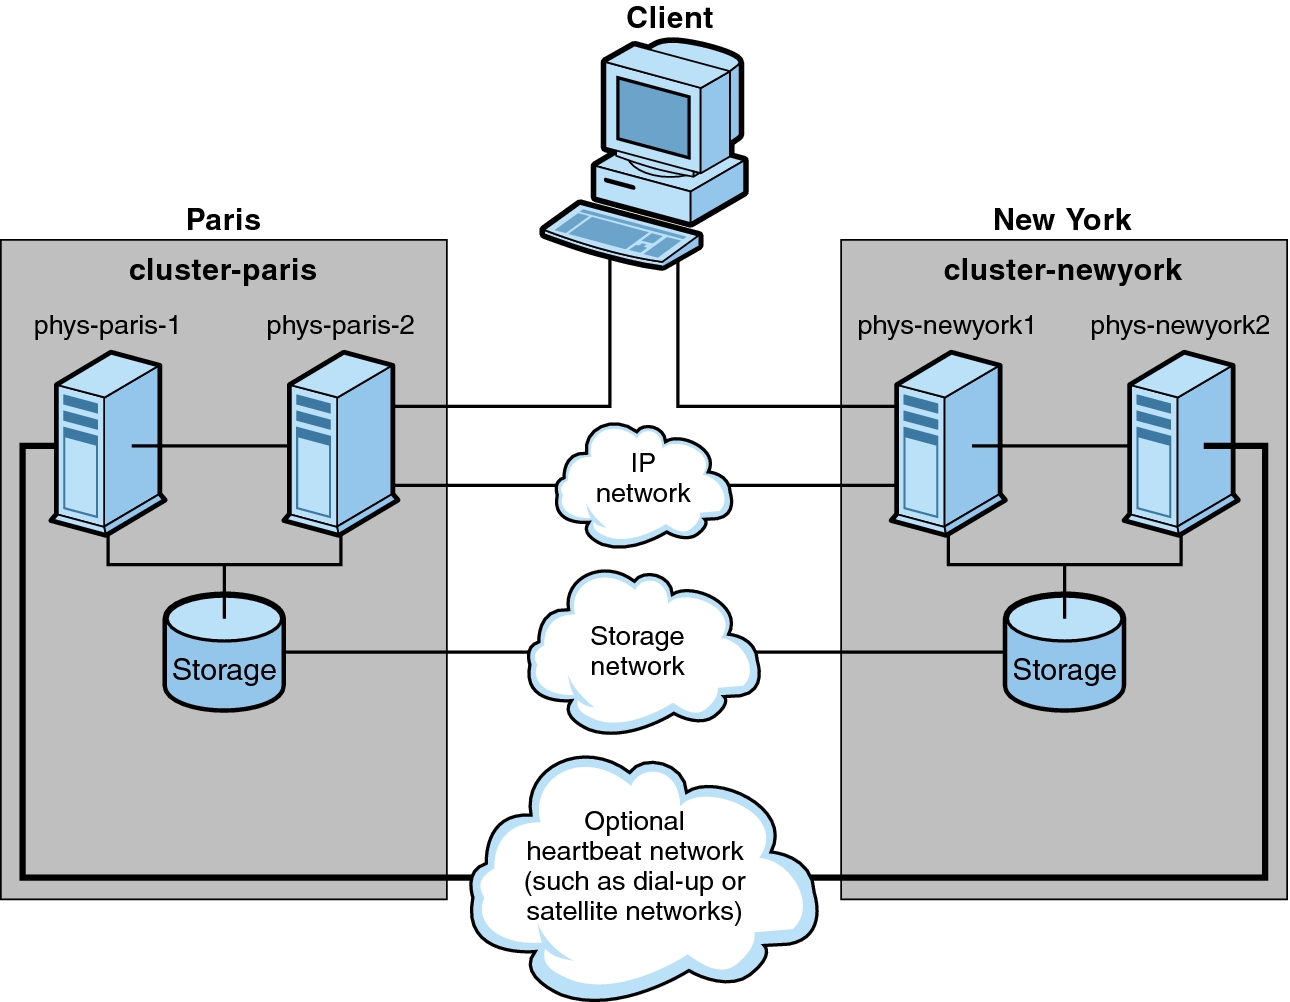 image:The figure illustrates a sample Geographic Edition configuration between cluster-paris and cluster-newyork.